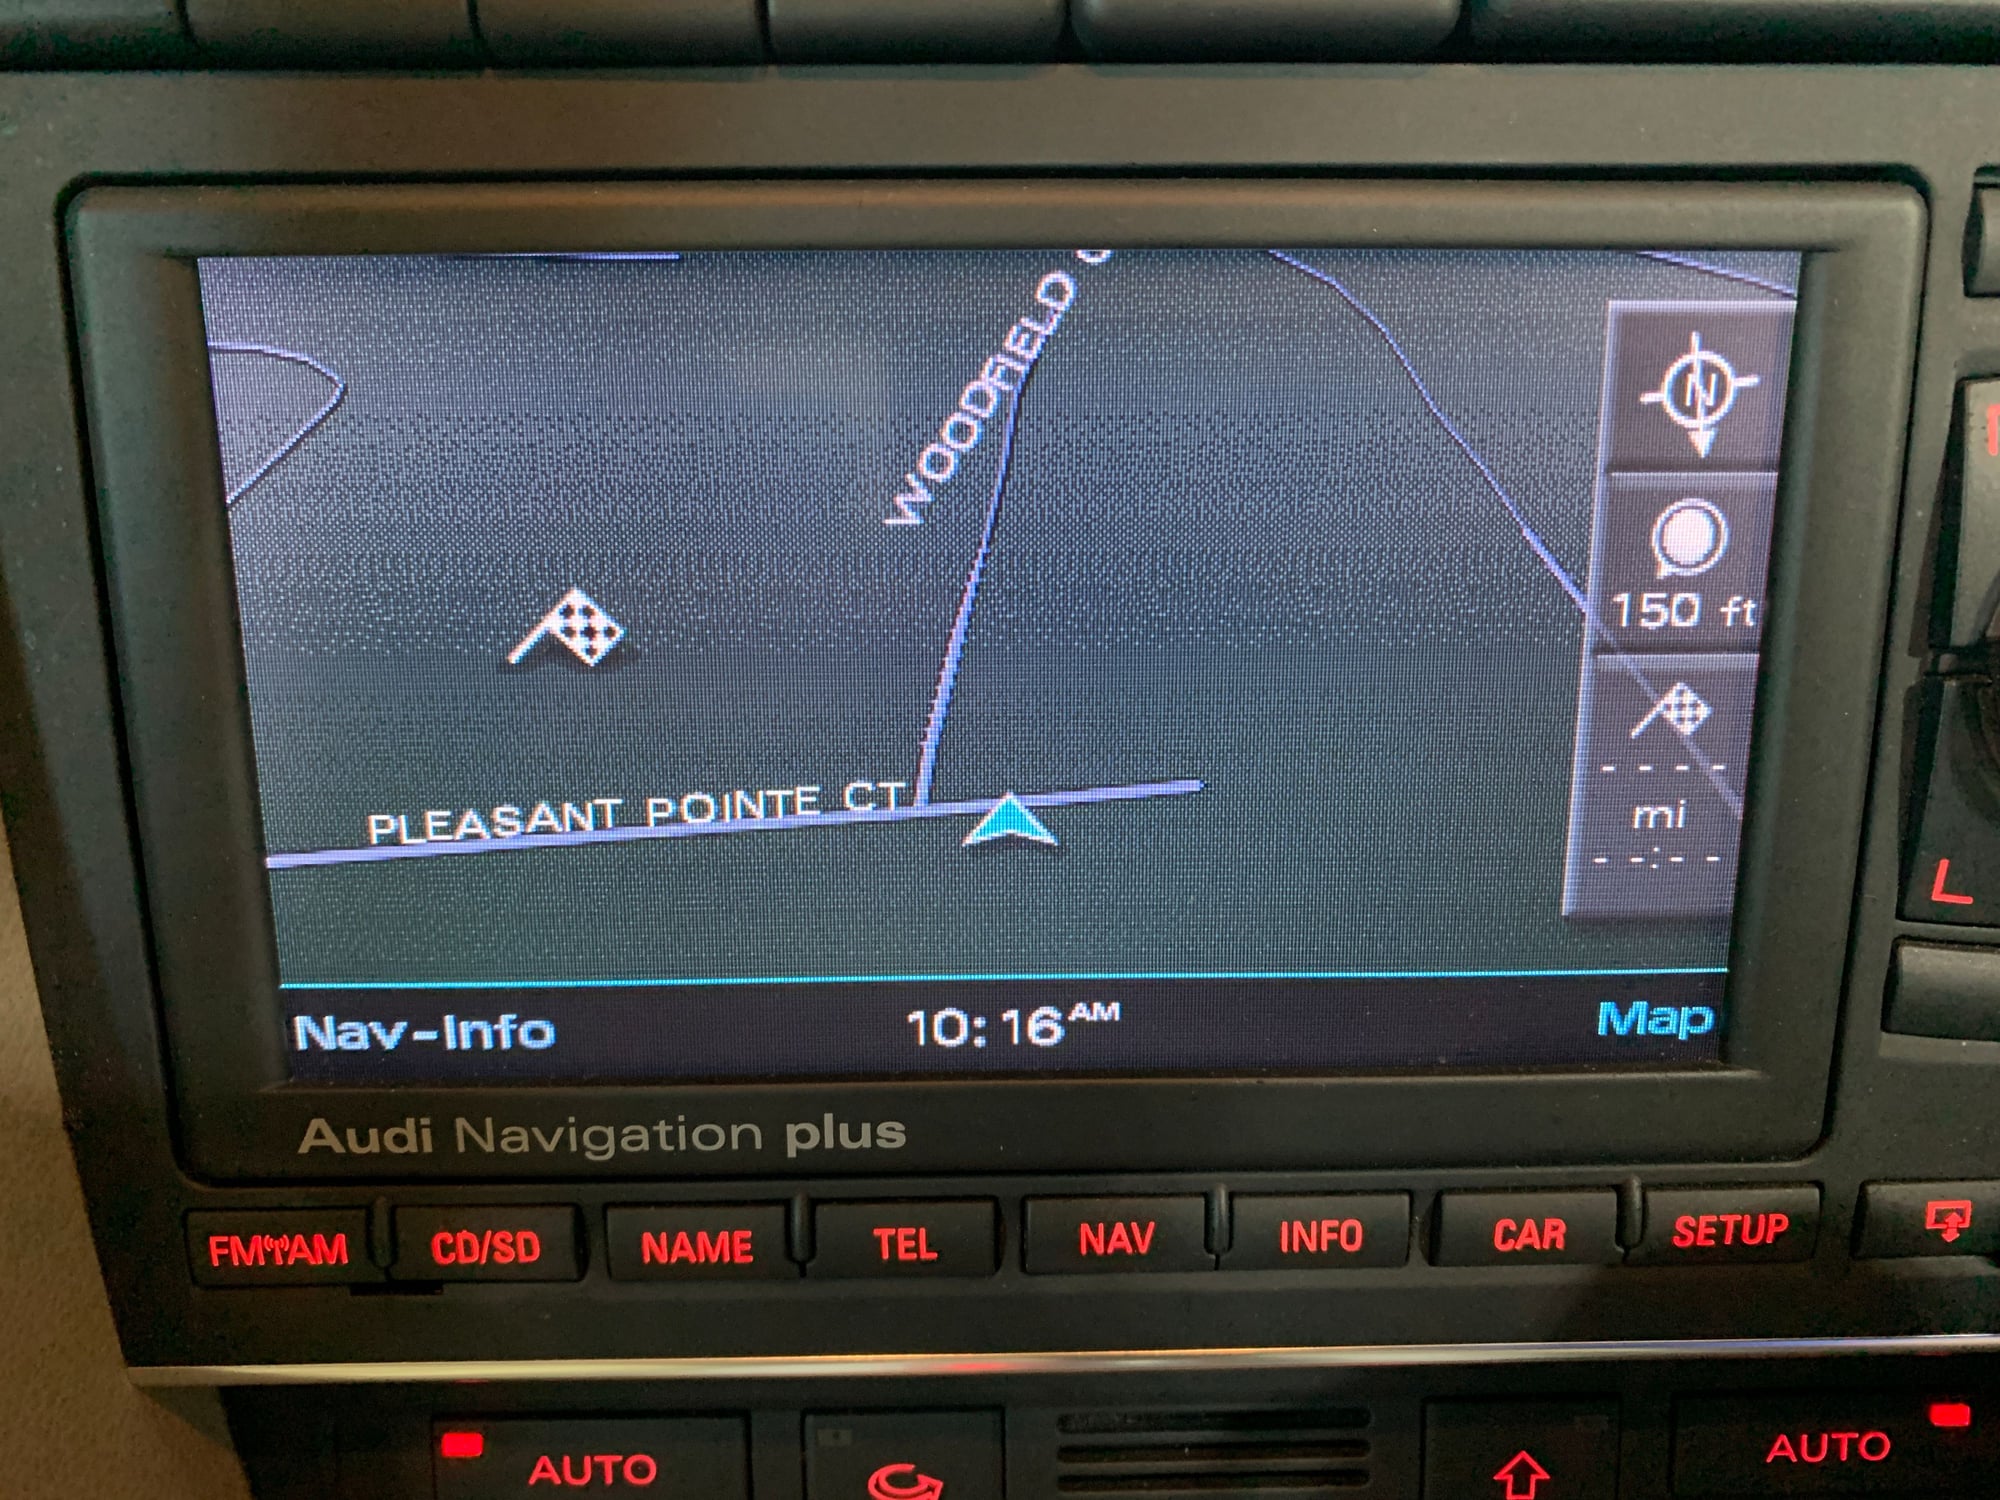 Audio Video/Electronics - Audi RNS-E Navigation Head Unit & 6 CD Changer - Removed from 2007 A4 Quattro Cabrio - Used - 2004 to 2009 Audi A4 Quattro - Richmond, KY 40475, United States